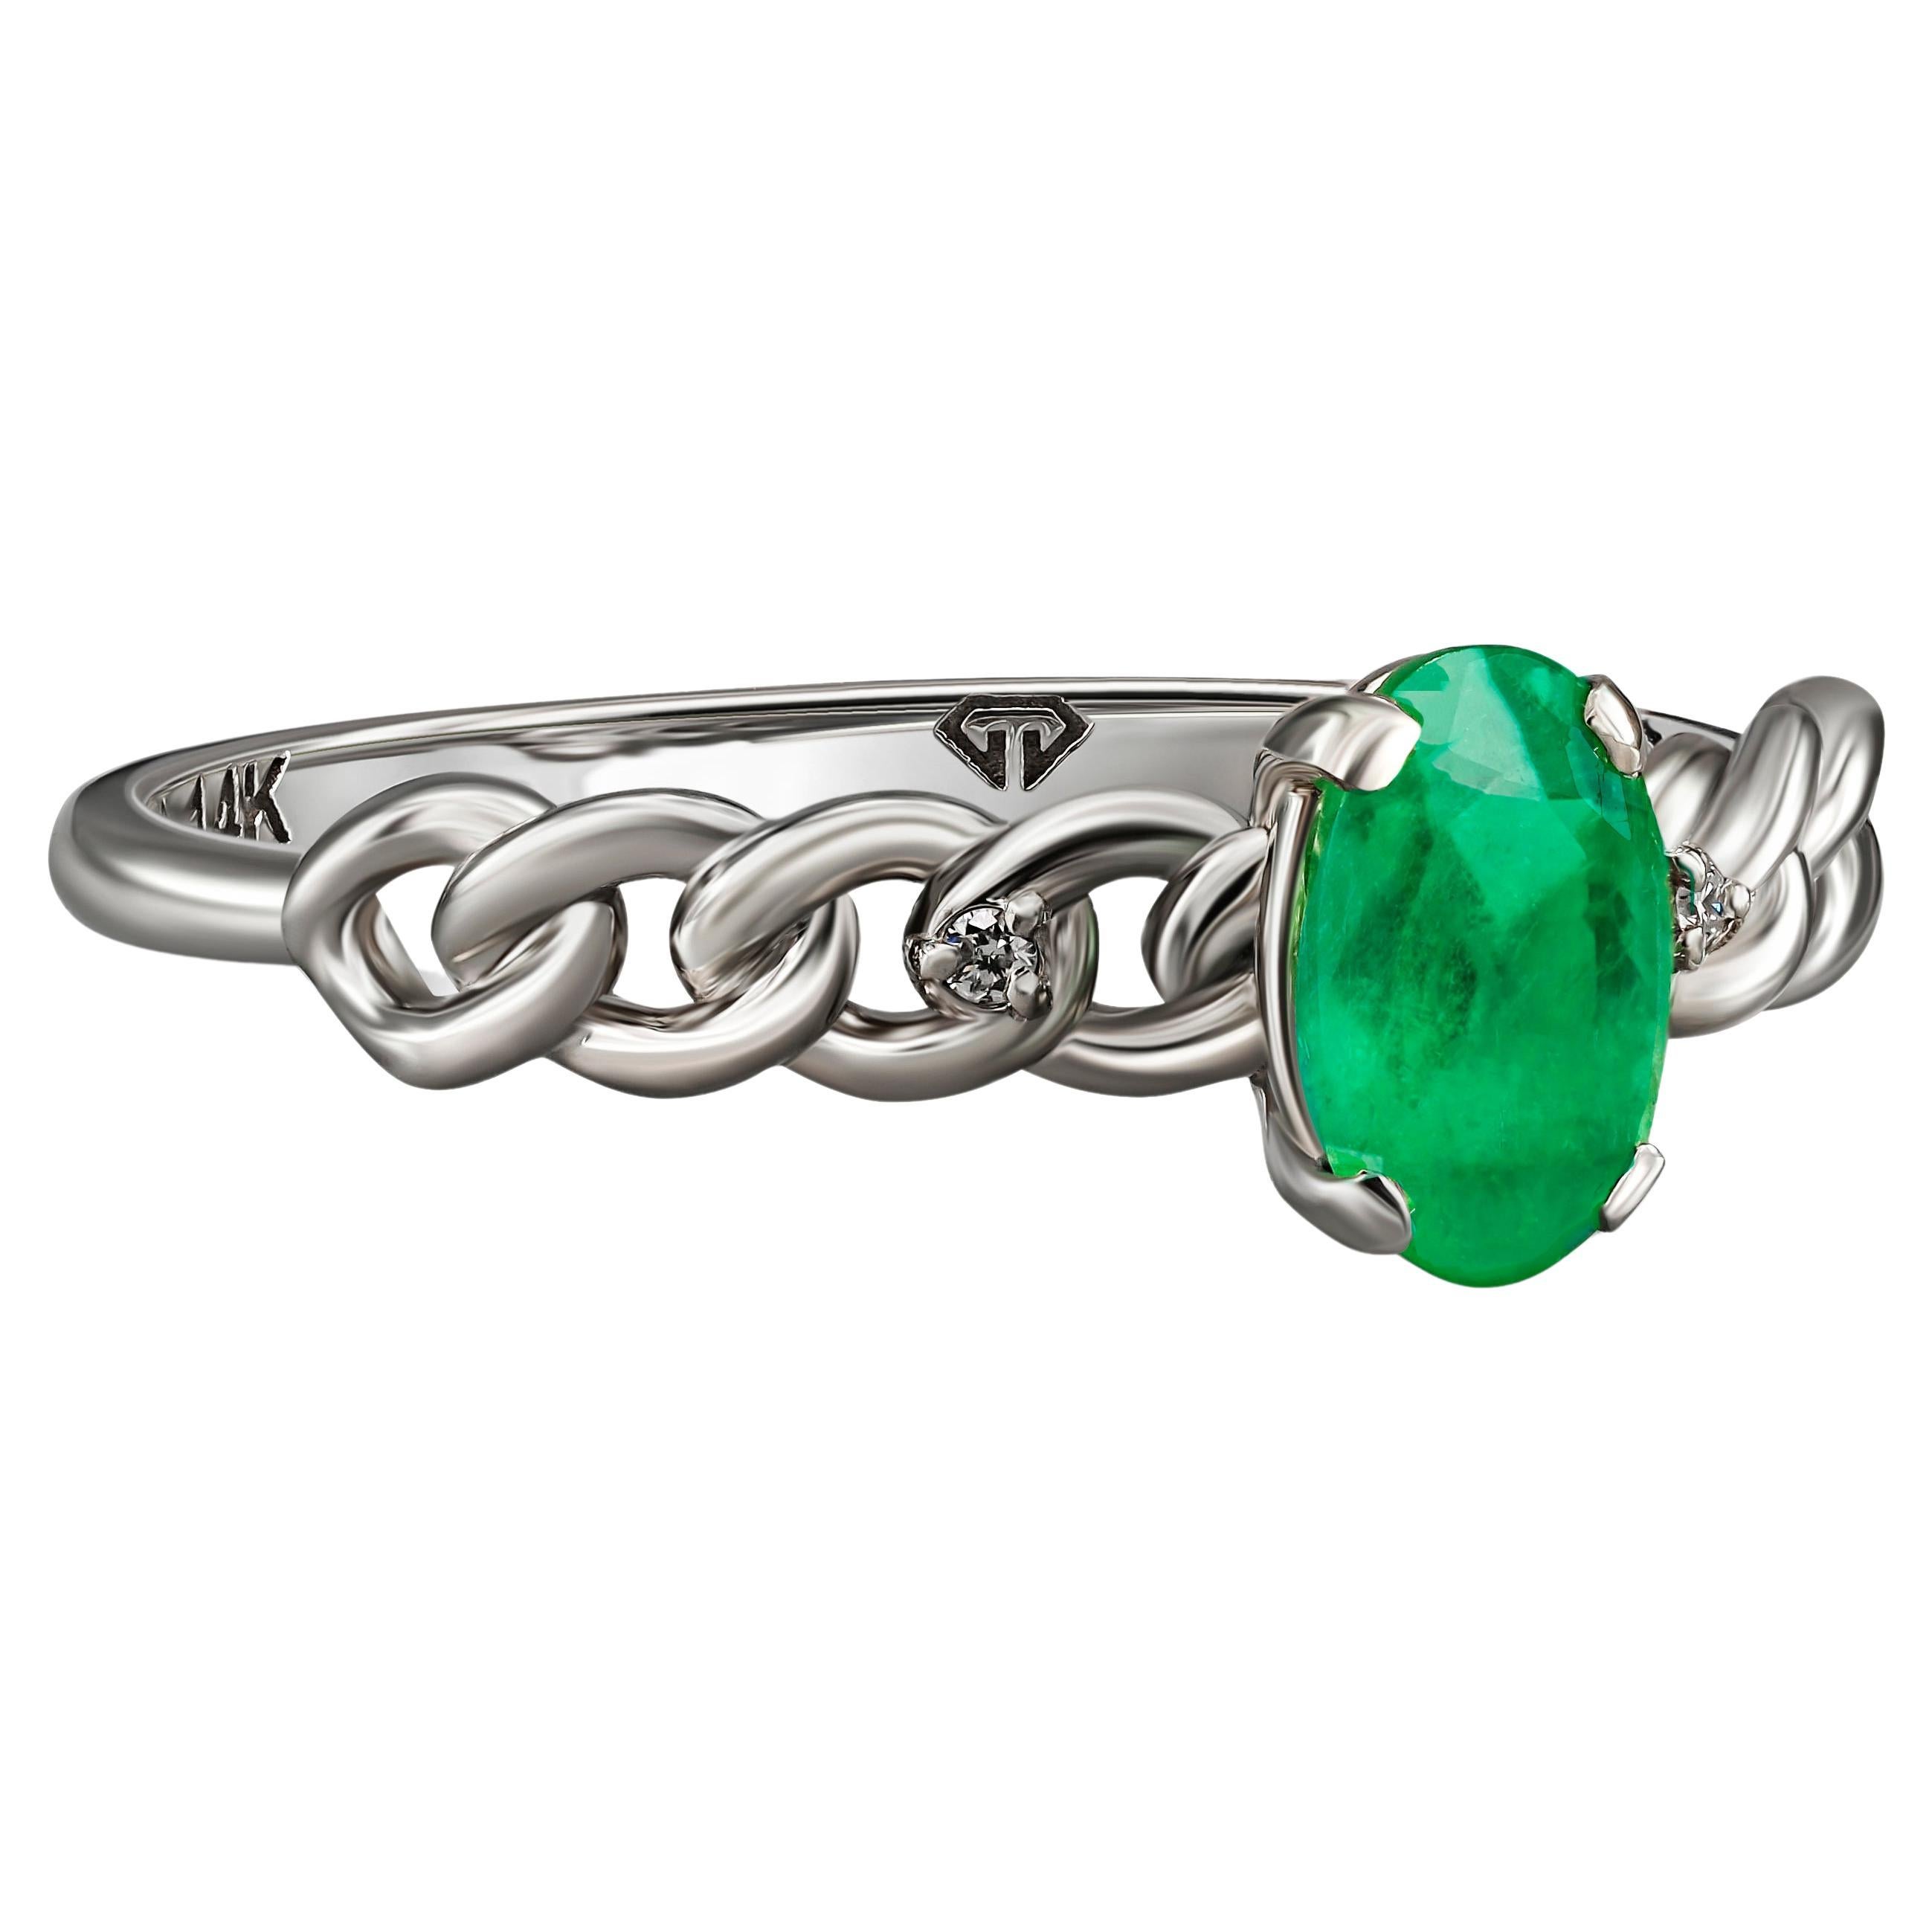 Oval emerald 14k gold ring. 